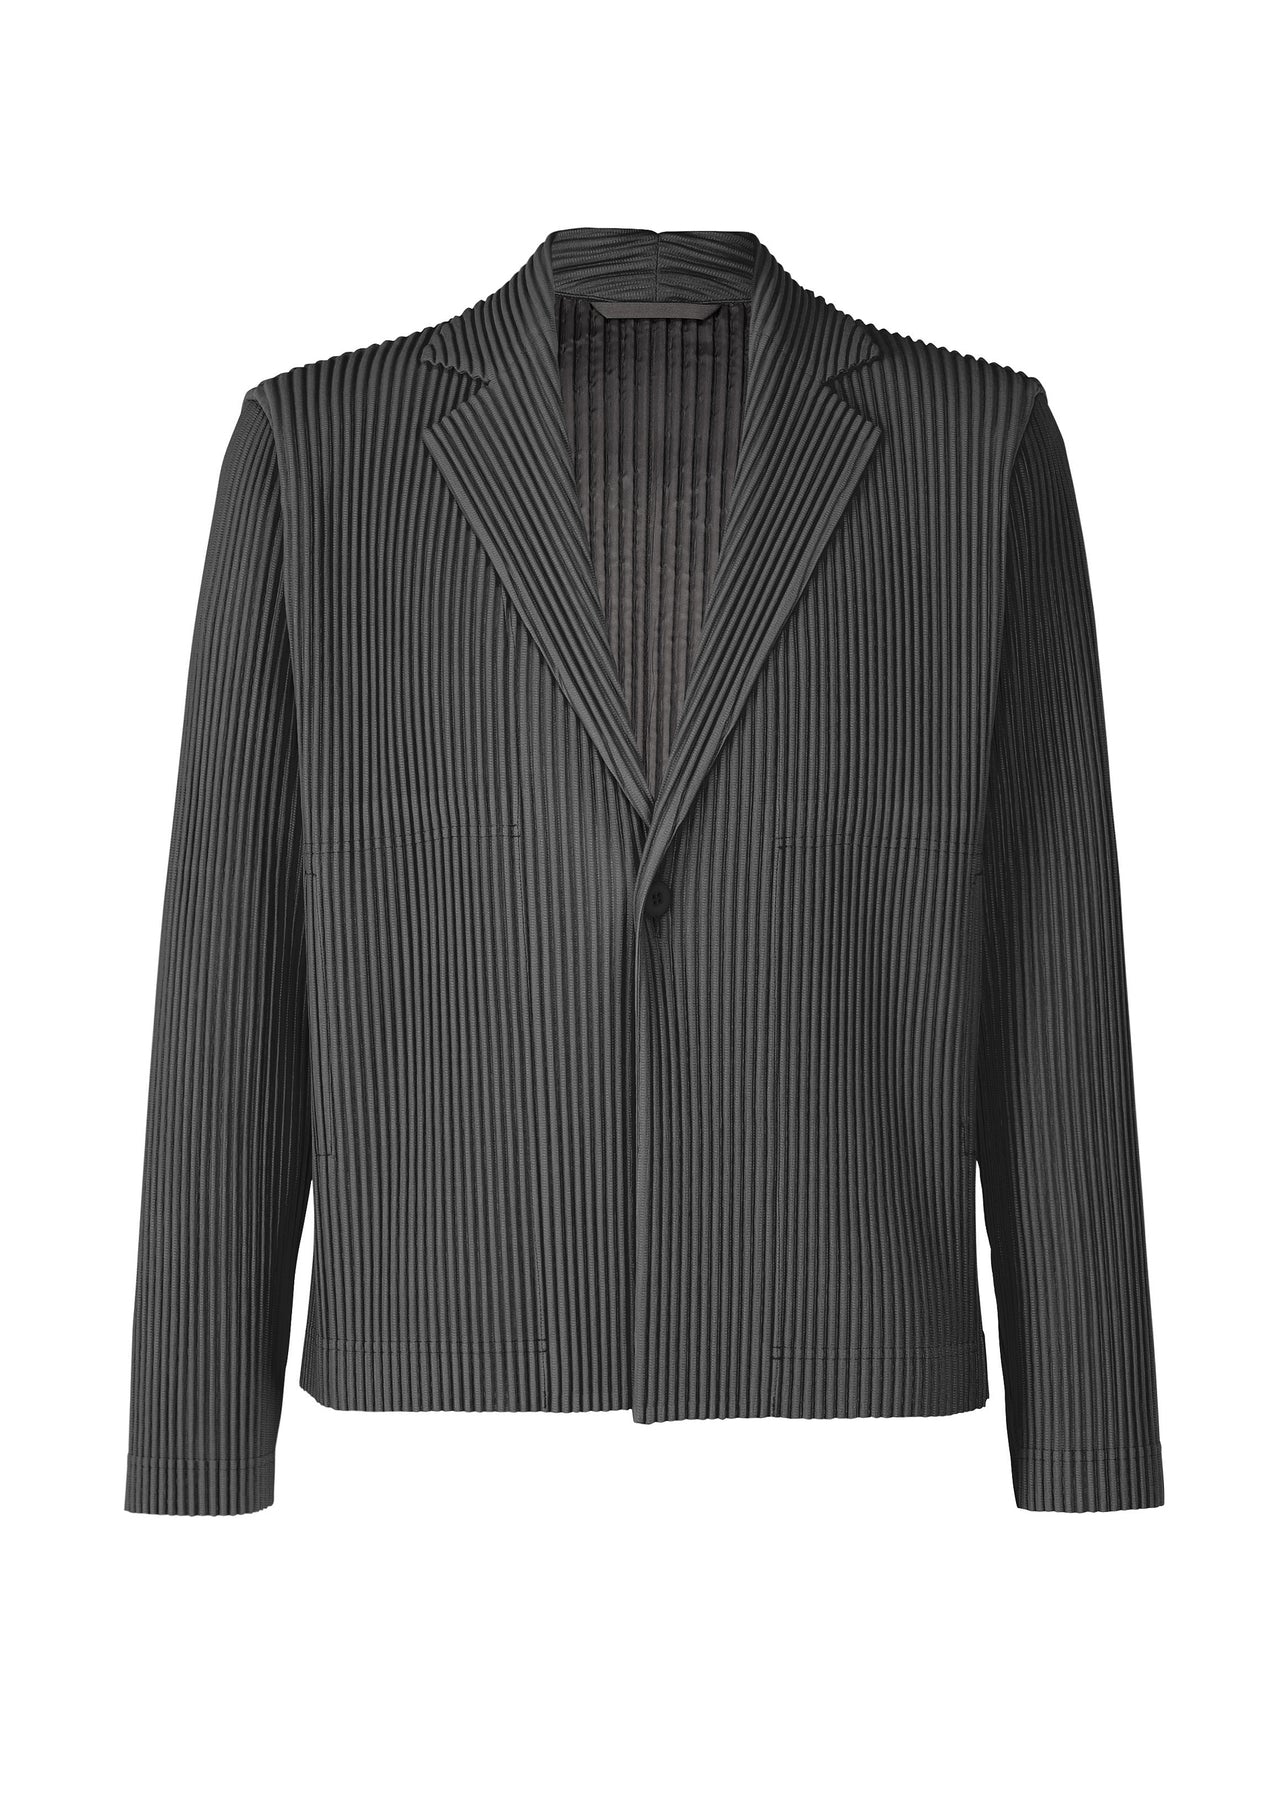 TAILORED PLEATS 2 JACKET | The official ISSEY MIYAKE ONLINE STORE